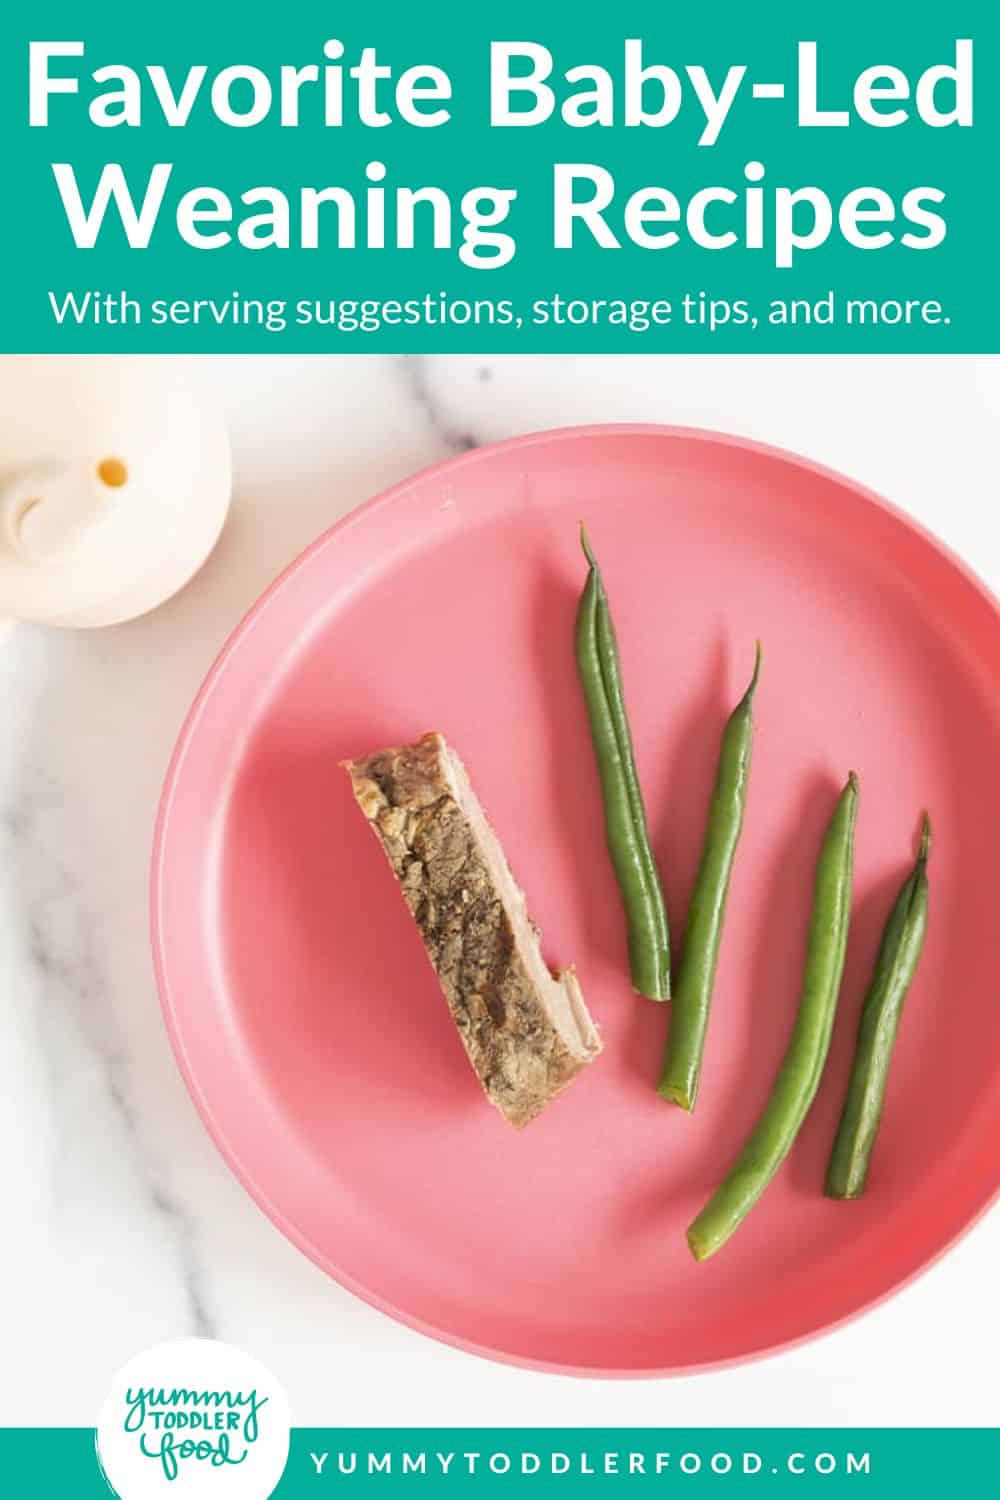 favorite baby-led weaning recipes Pin.